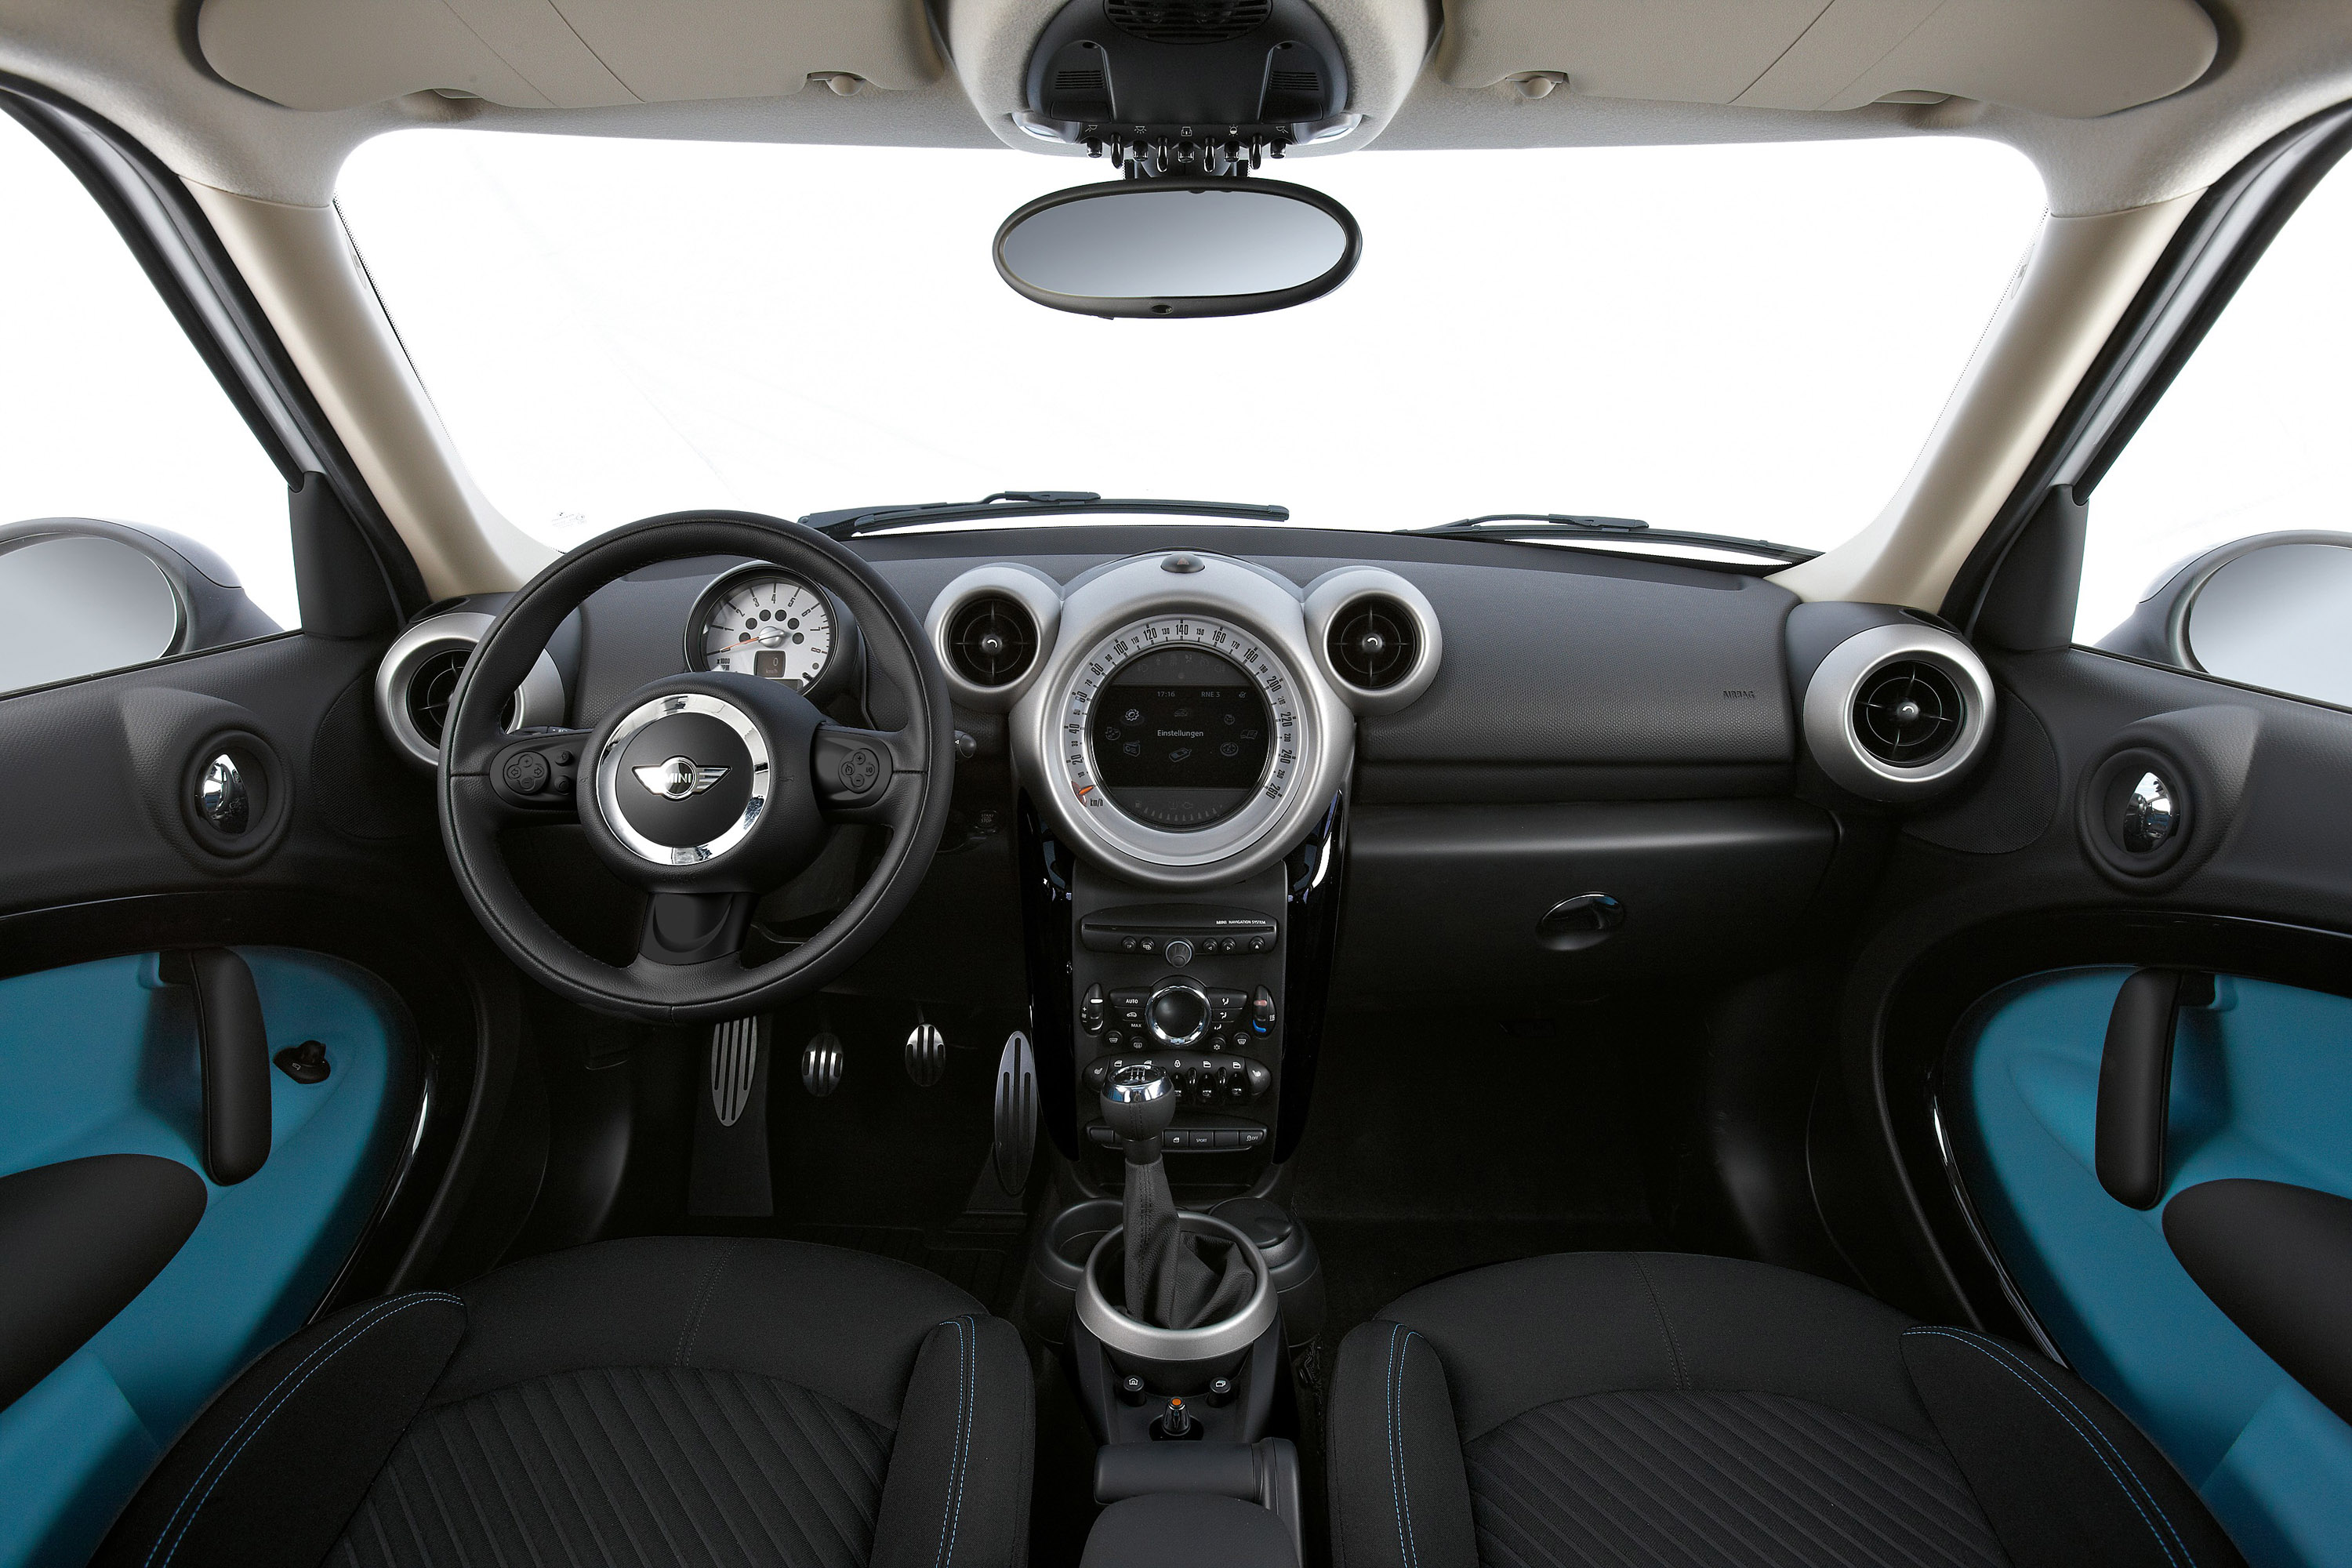 Mini Cooper Countryman 19 | HD Wallpapers online